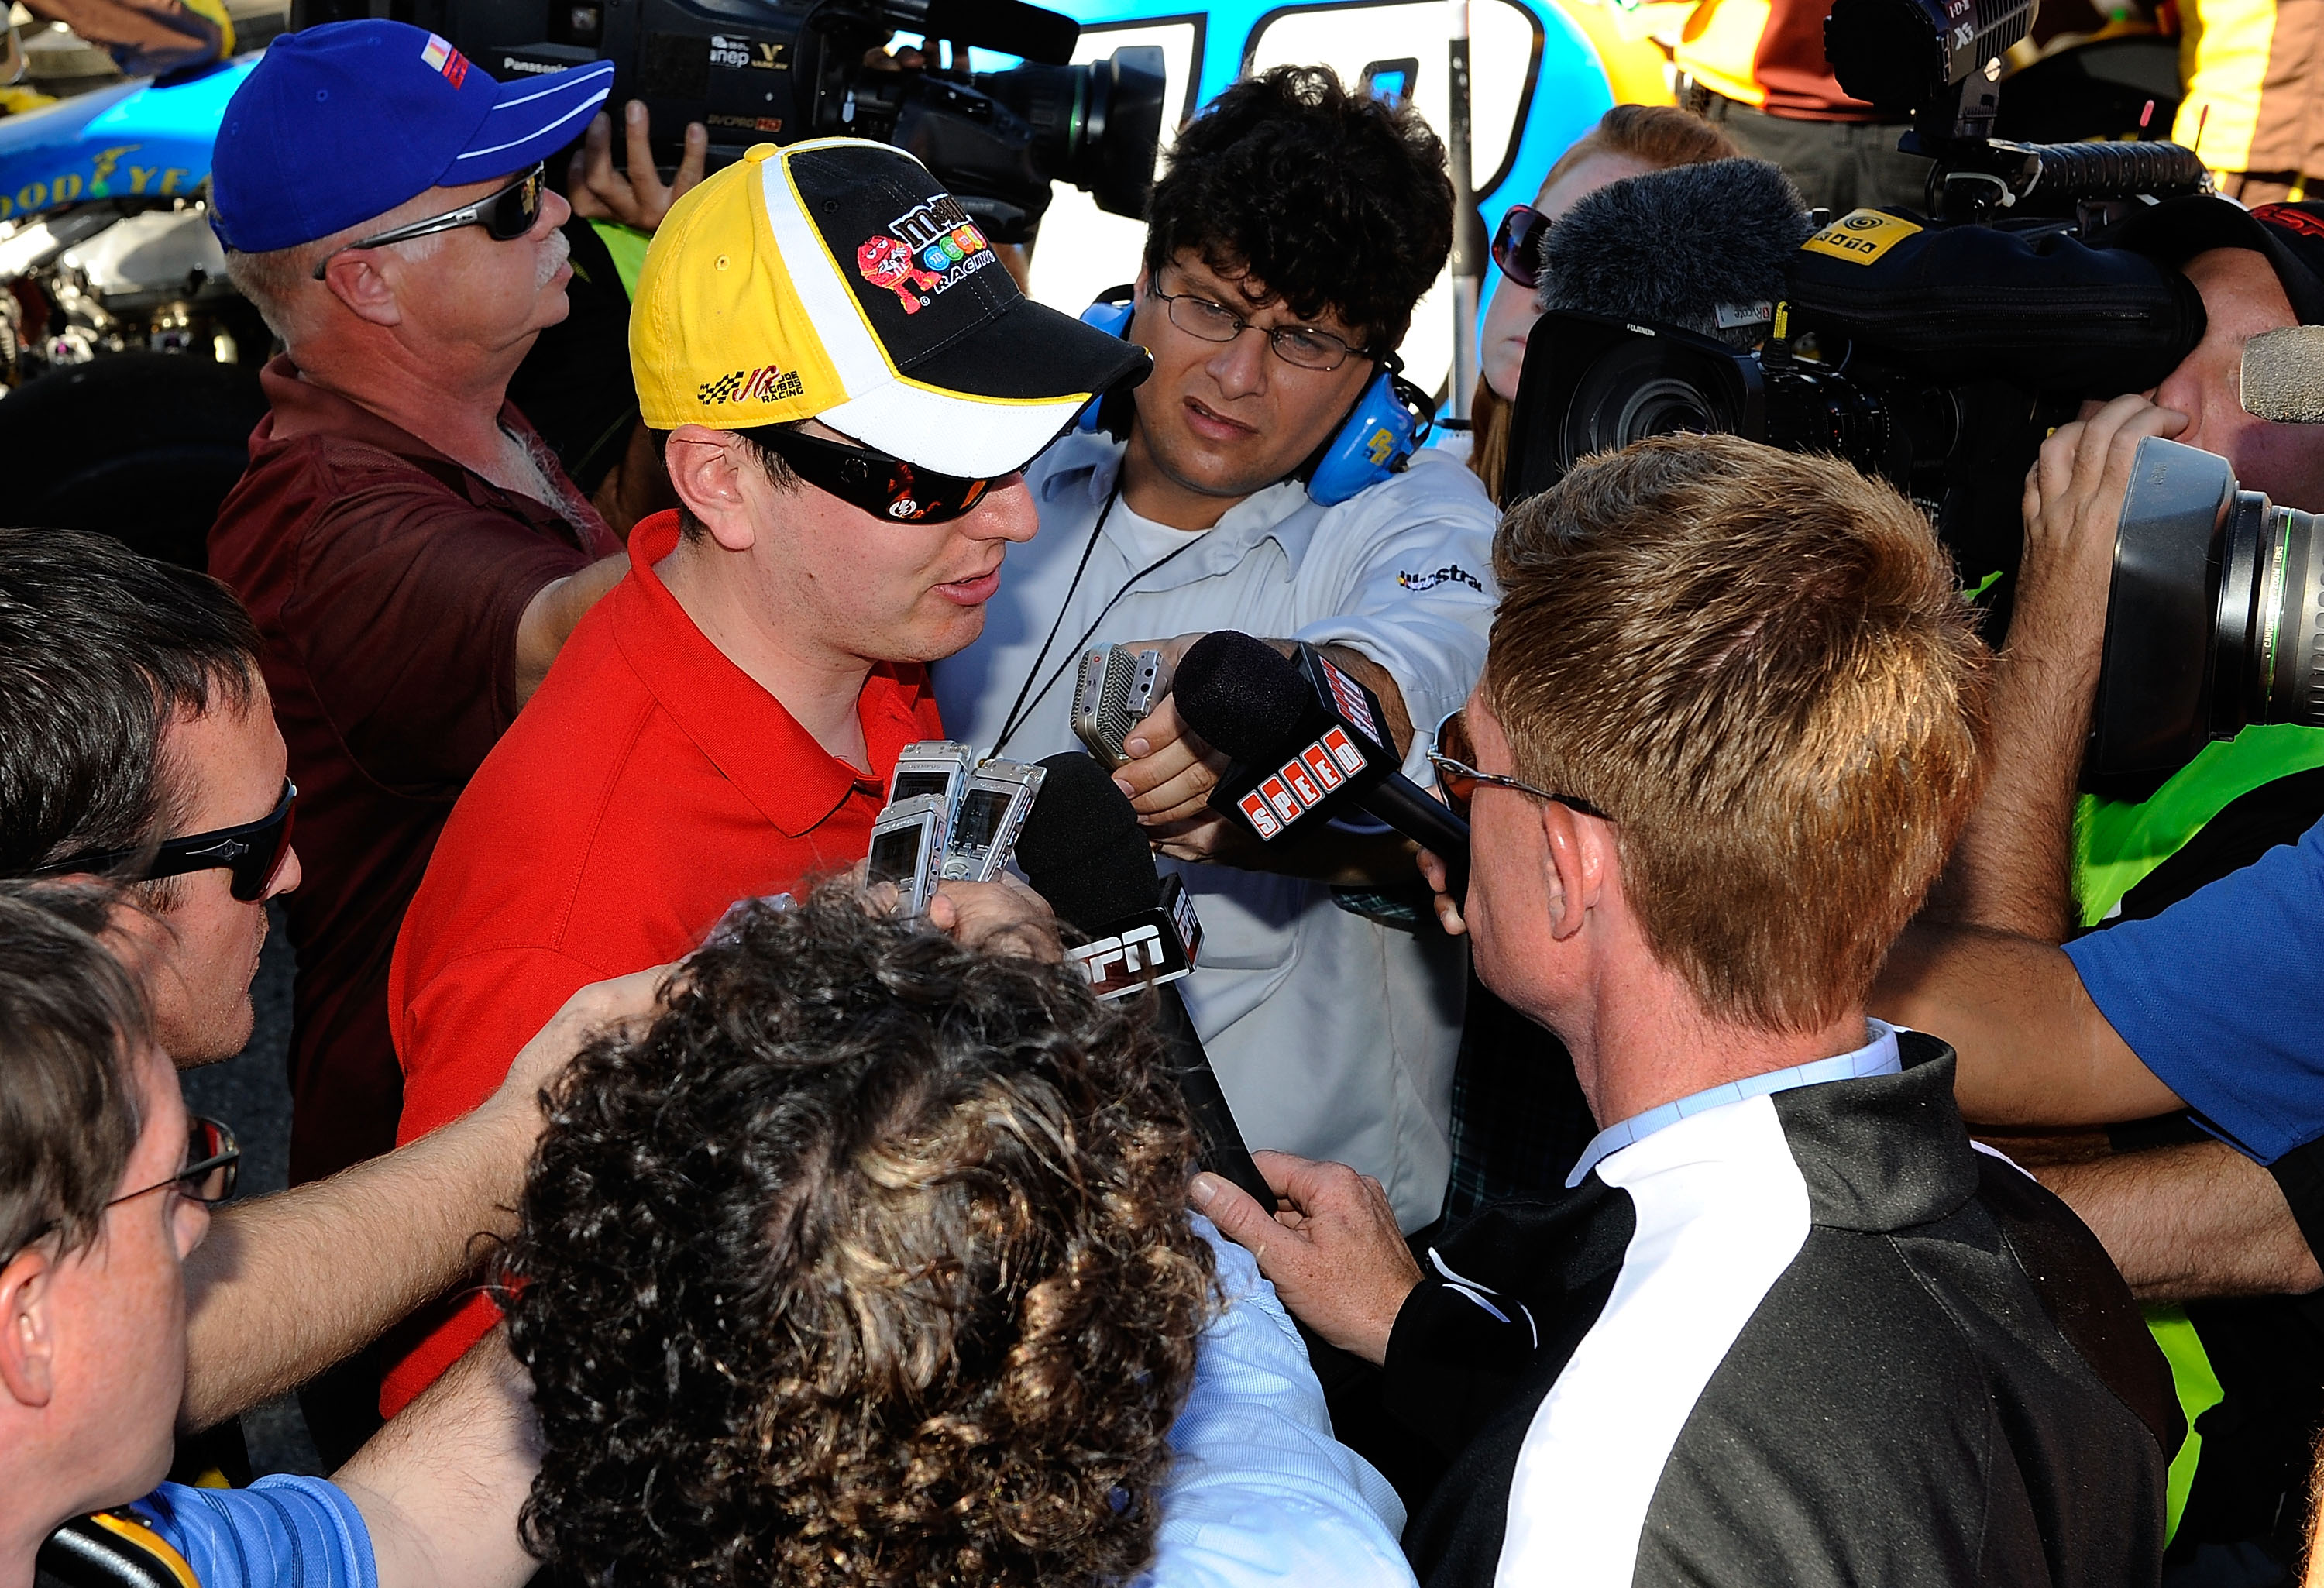 FONTANA, CA - OCTOBER 10:  Kyle Busch, driver of the #18 M&M'sToyota, speaks to the media after blowing a motor during the NASCAR Sprint Cup Series Pepsi Max 400 on October 10, 2010 in Fontana, California.  (Photo by Rusty Jarrett/Getty Images for NASCAR)